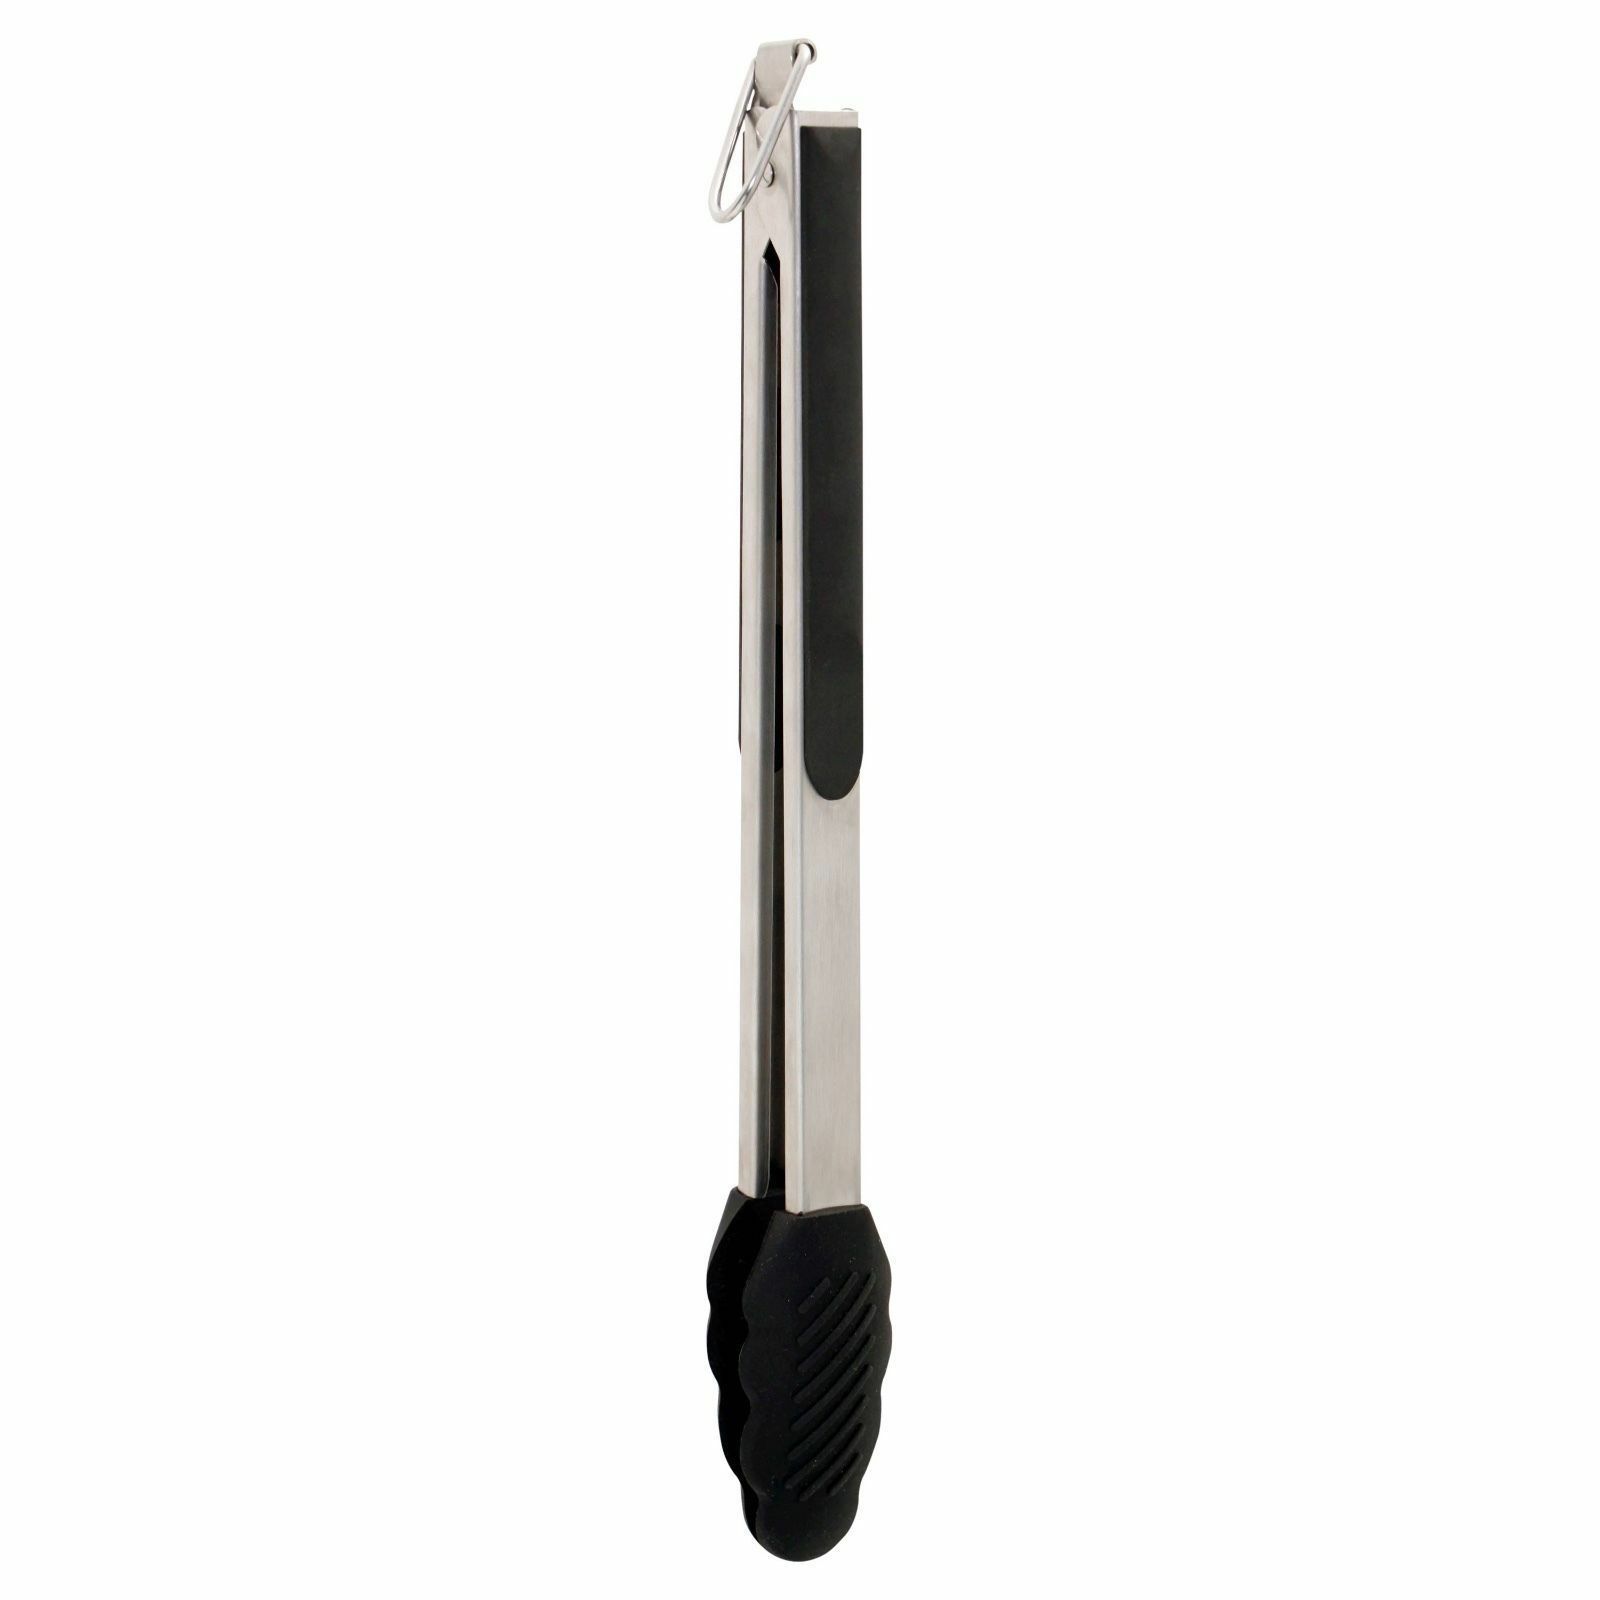 New 13" Stainless Steel Locking Tongs Black Silicone Tips Room Essentials CHEAP - $5.87 - $9.79